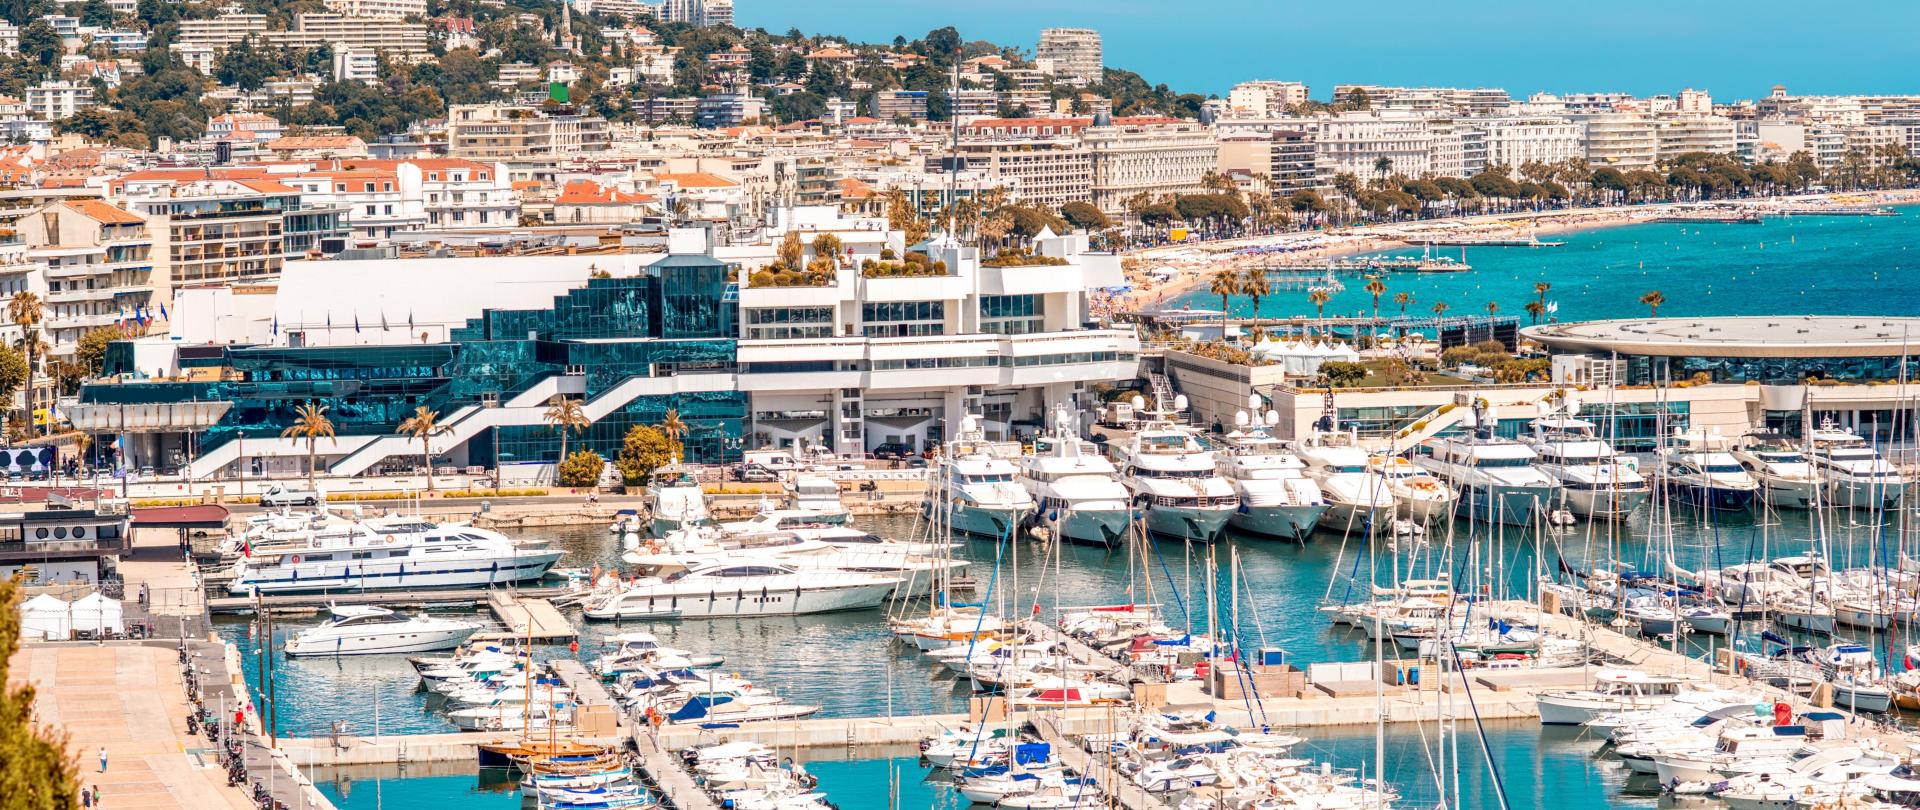 Cannes Yachting Festival 2022 | Cannes Boat Show | Oyster Yachts